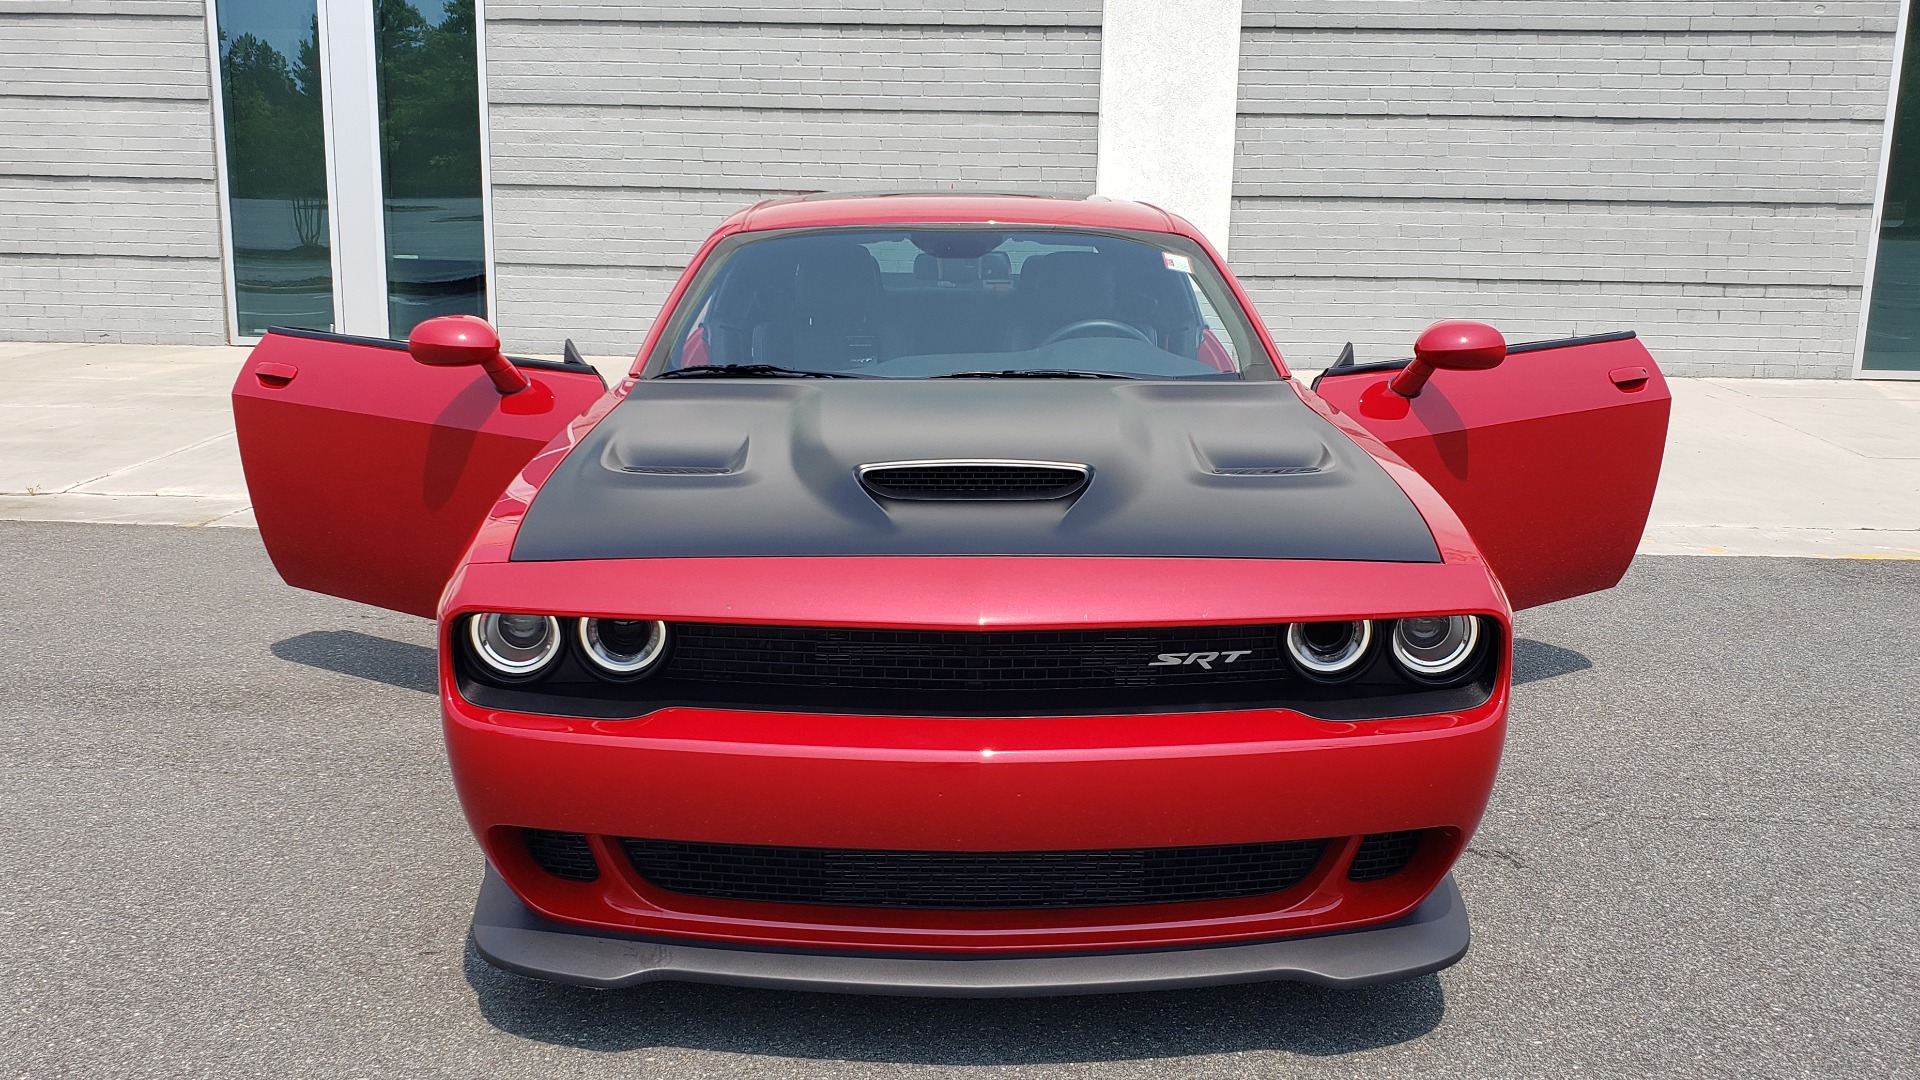 Used 2016 Dodge CHALLENGER SRT HELLCAT 707HP COUPE / AUTO / NAV / SUNROOF / H/K SND / REARVIEW for sale Sold at Formula Imports in Charlotte NC 28227 24